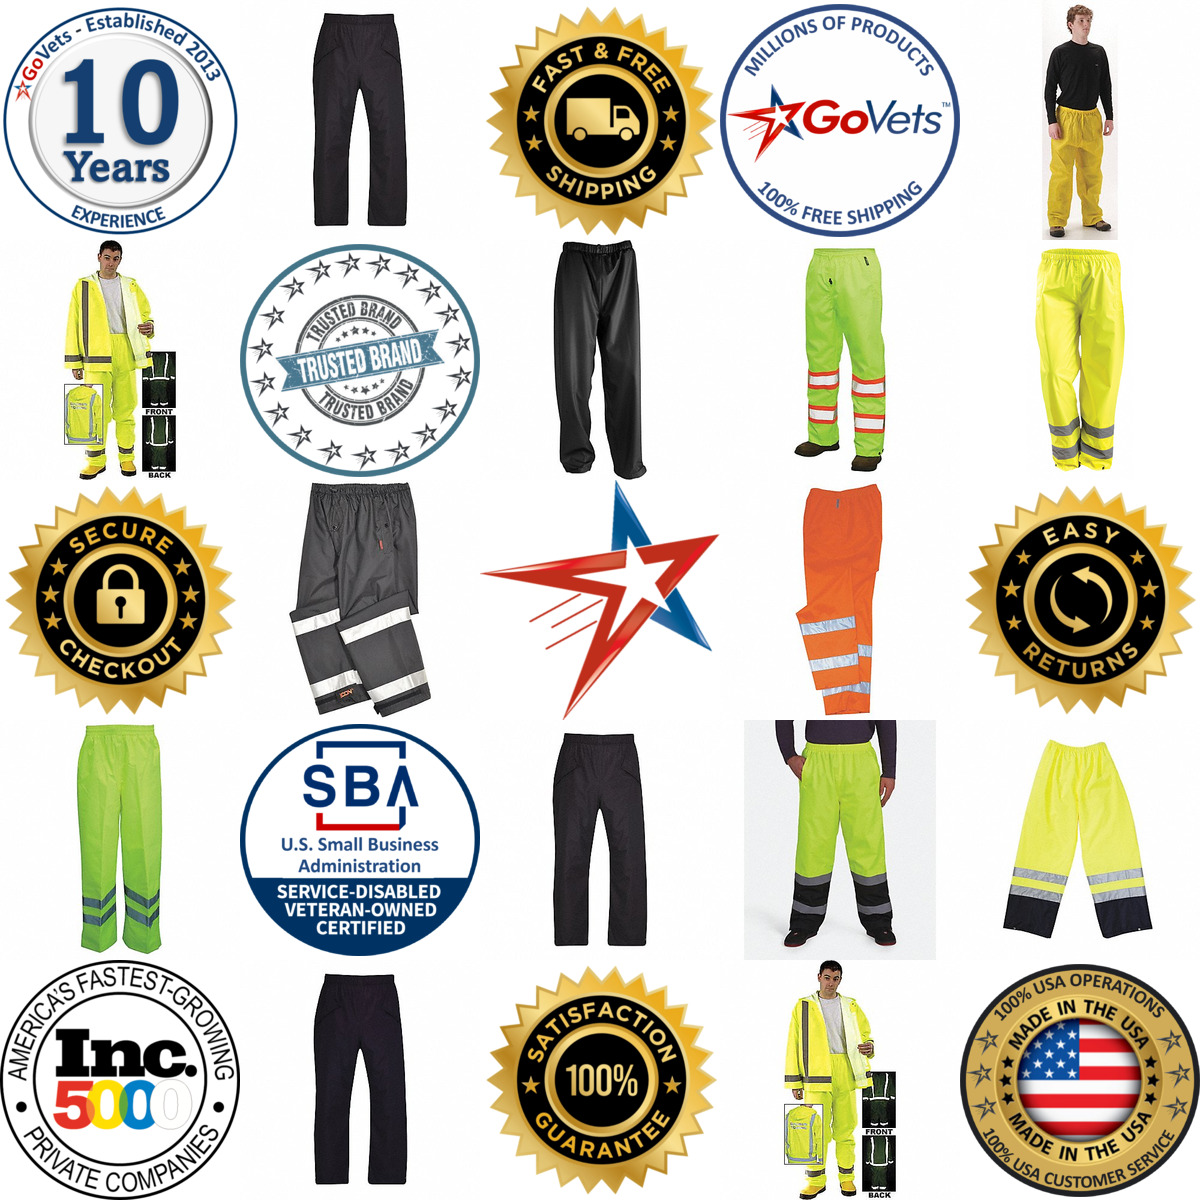 A selection of Rain Pants products on GoVets